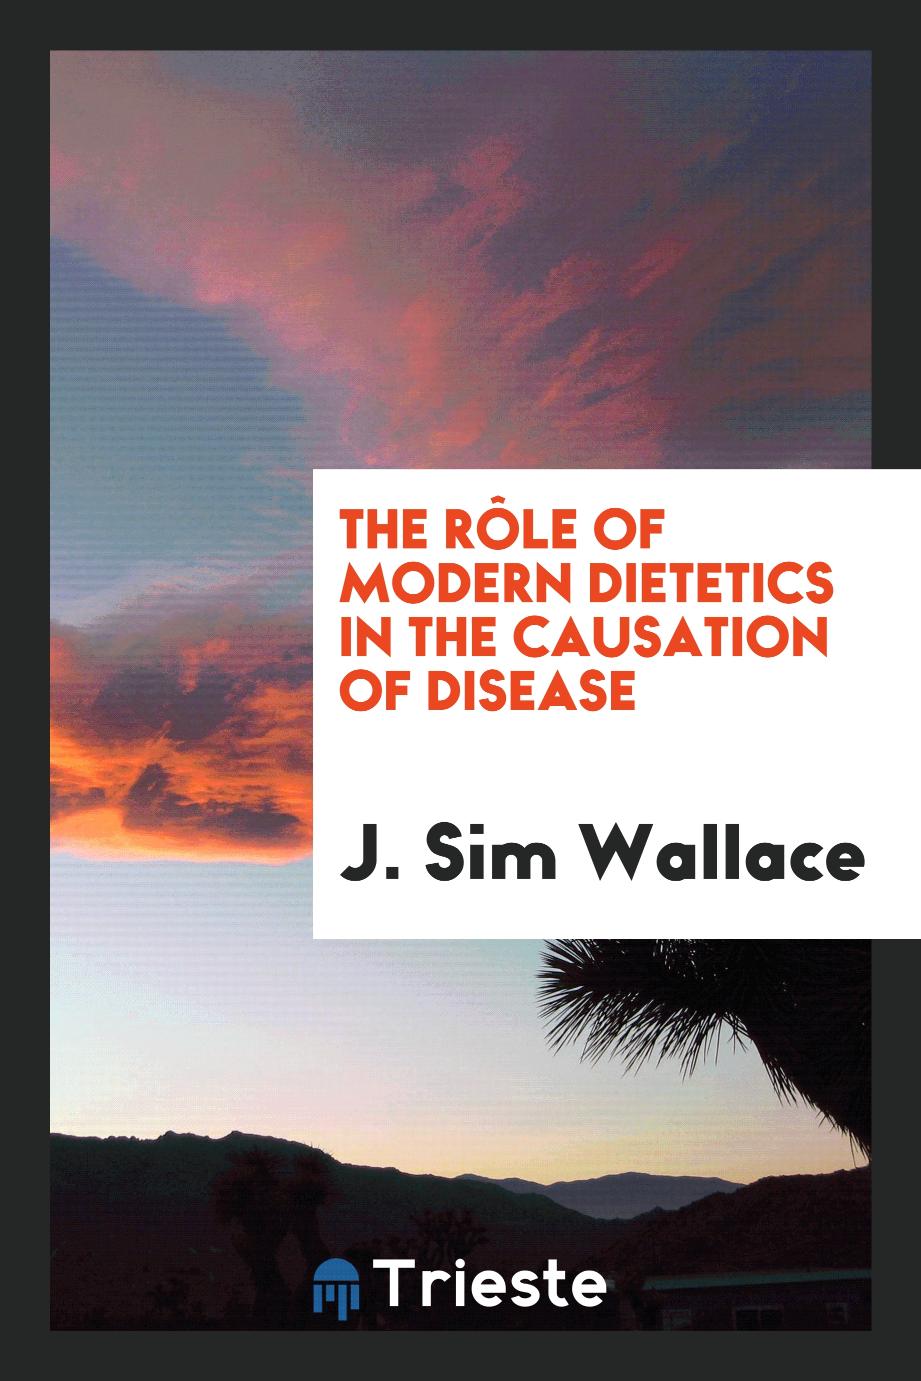 The Rôle of Modern Dietetics in the Causation of Disease